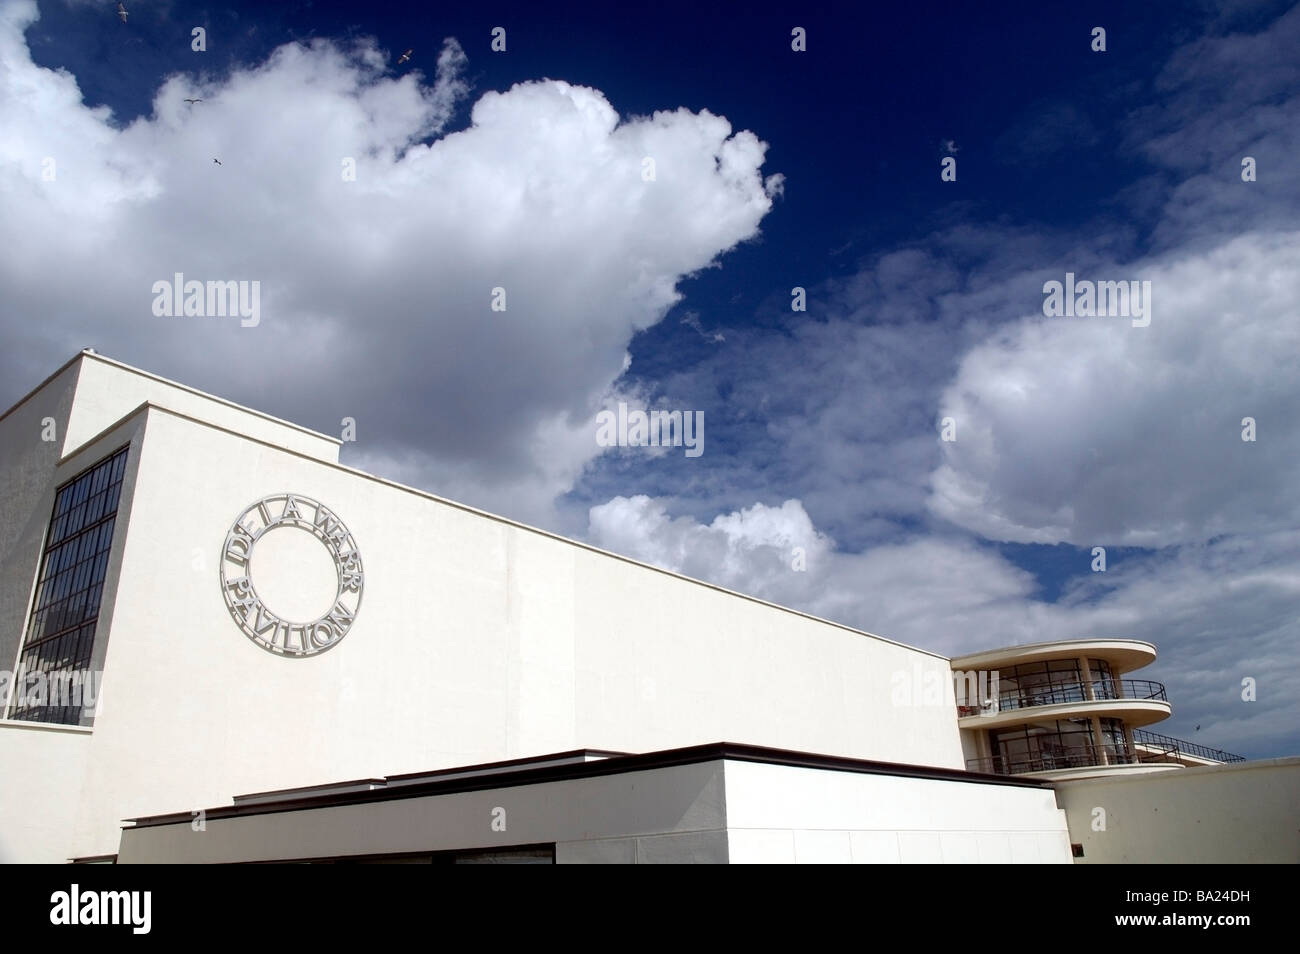 The renovated 1930s Art Deco De La Warr Pavilion, on the seafront, Bexhill on Sea, England. Stock Photo